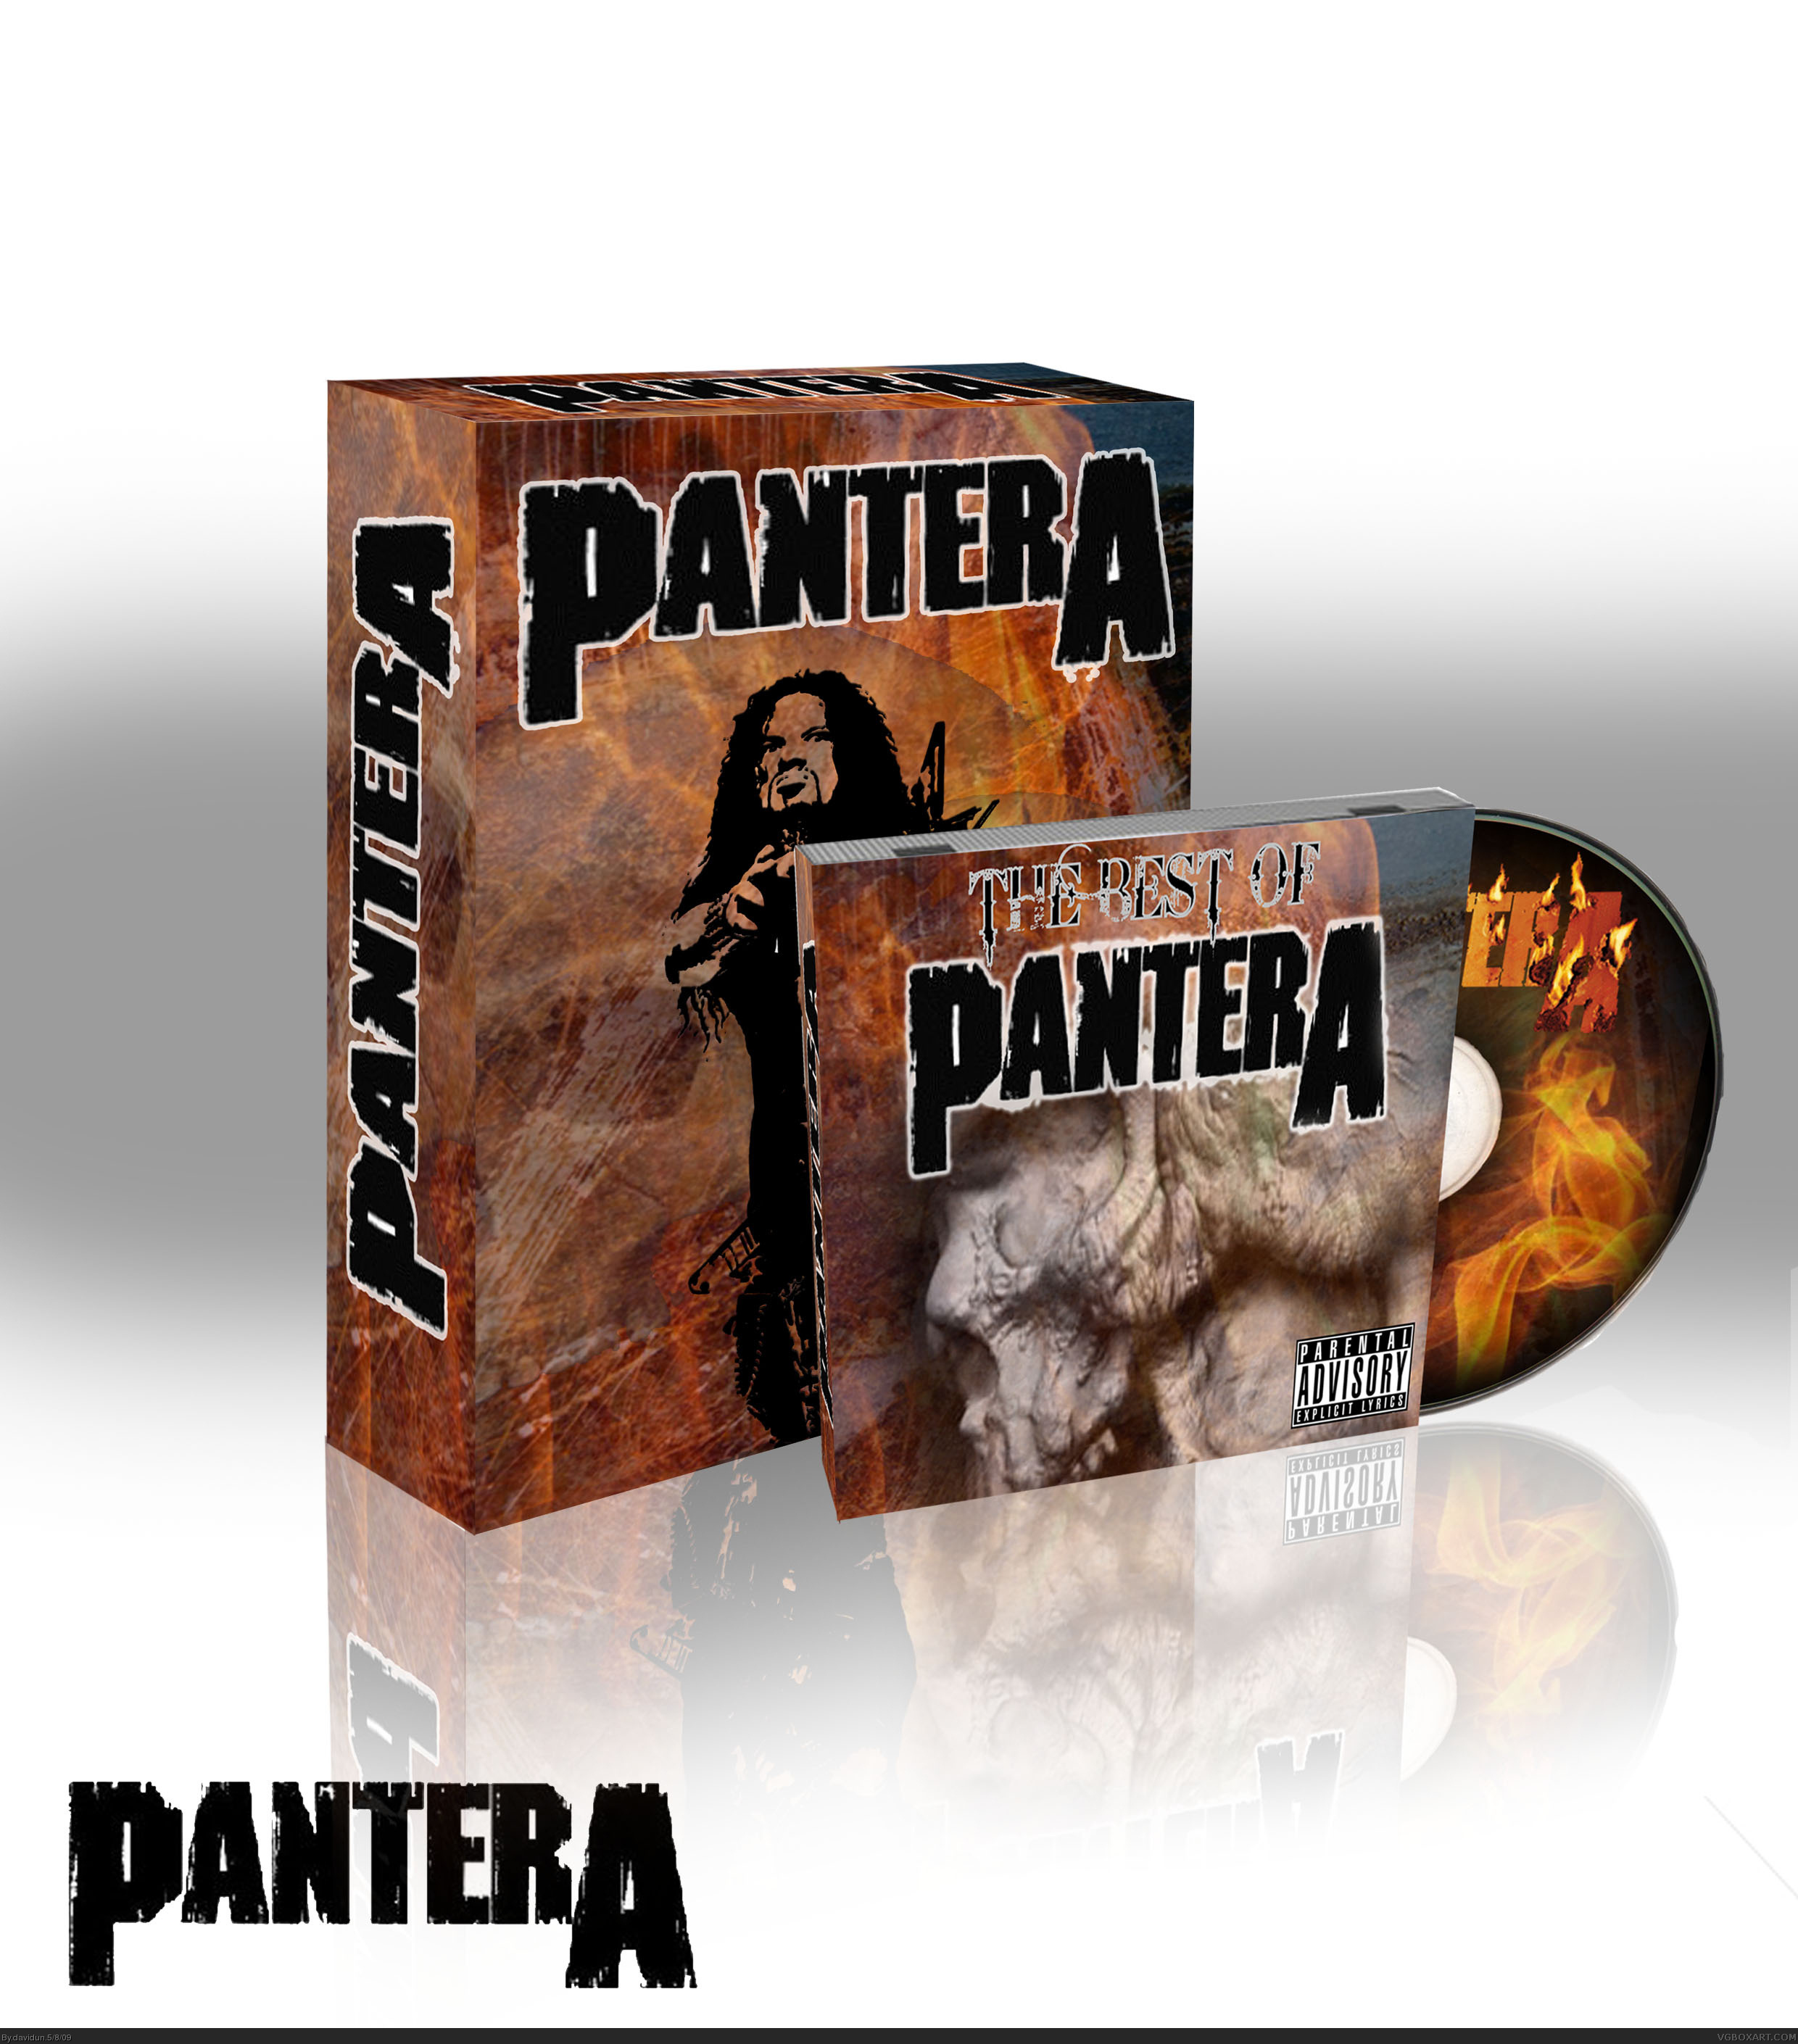 The best of pantera box cover